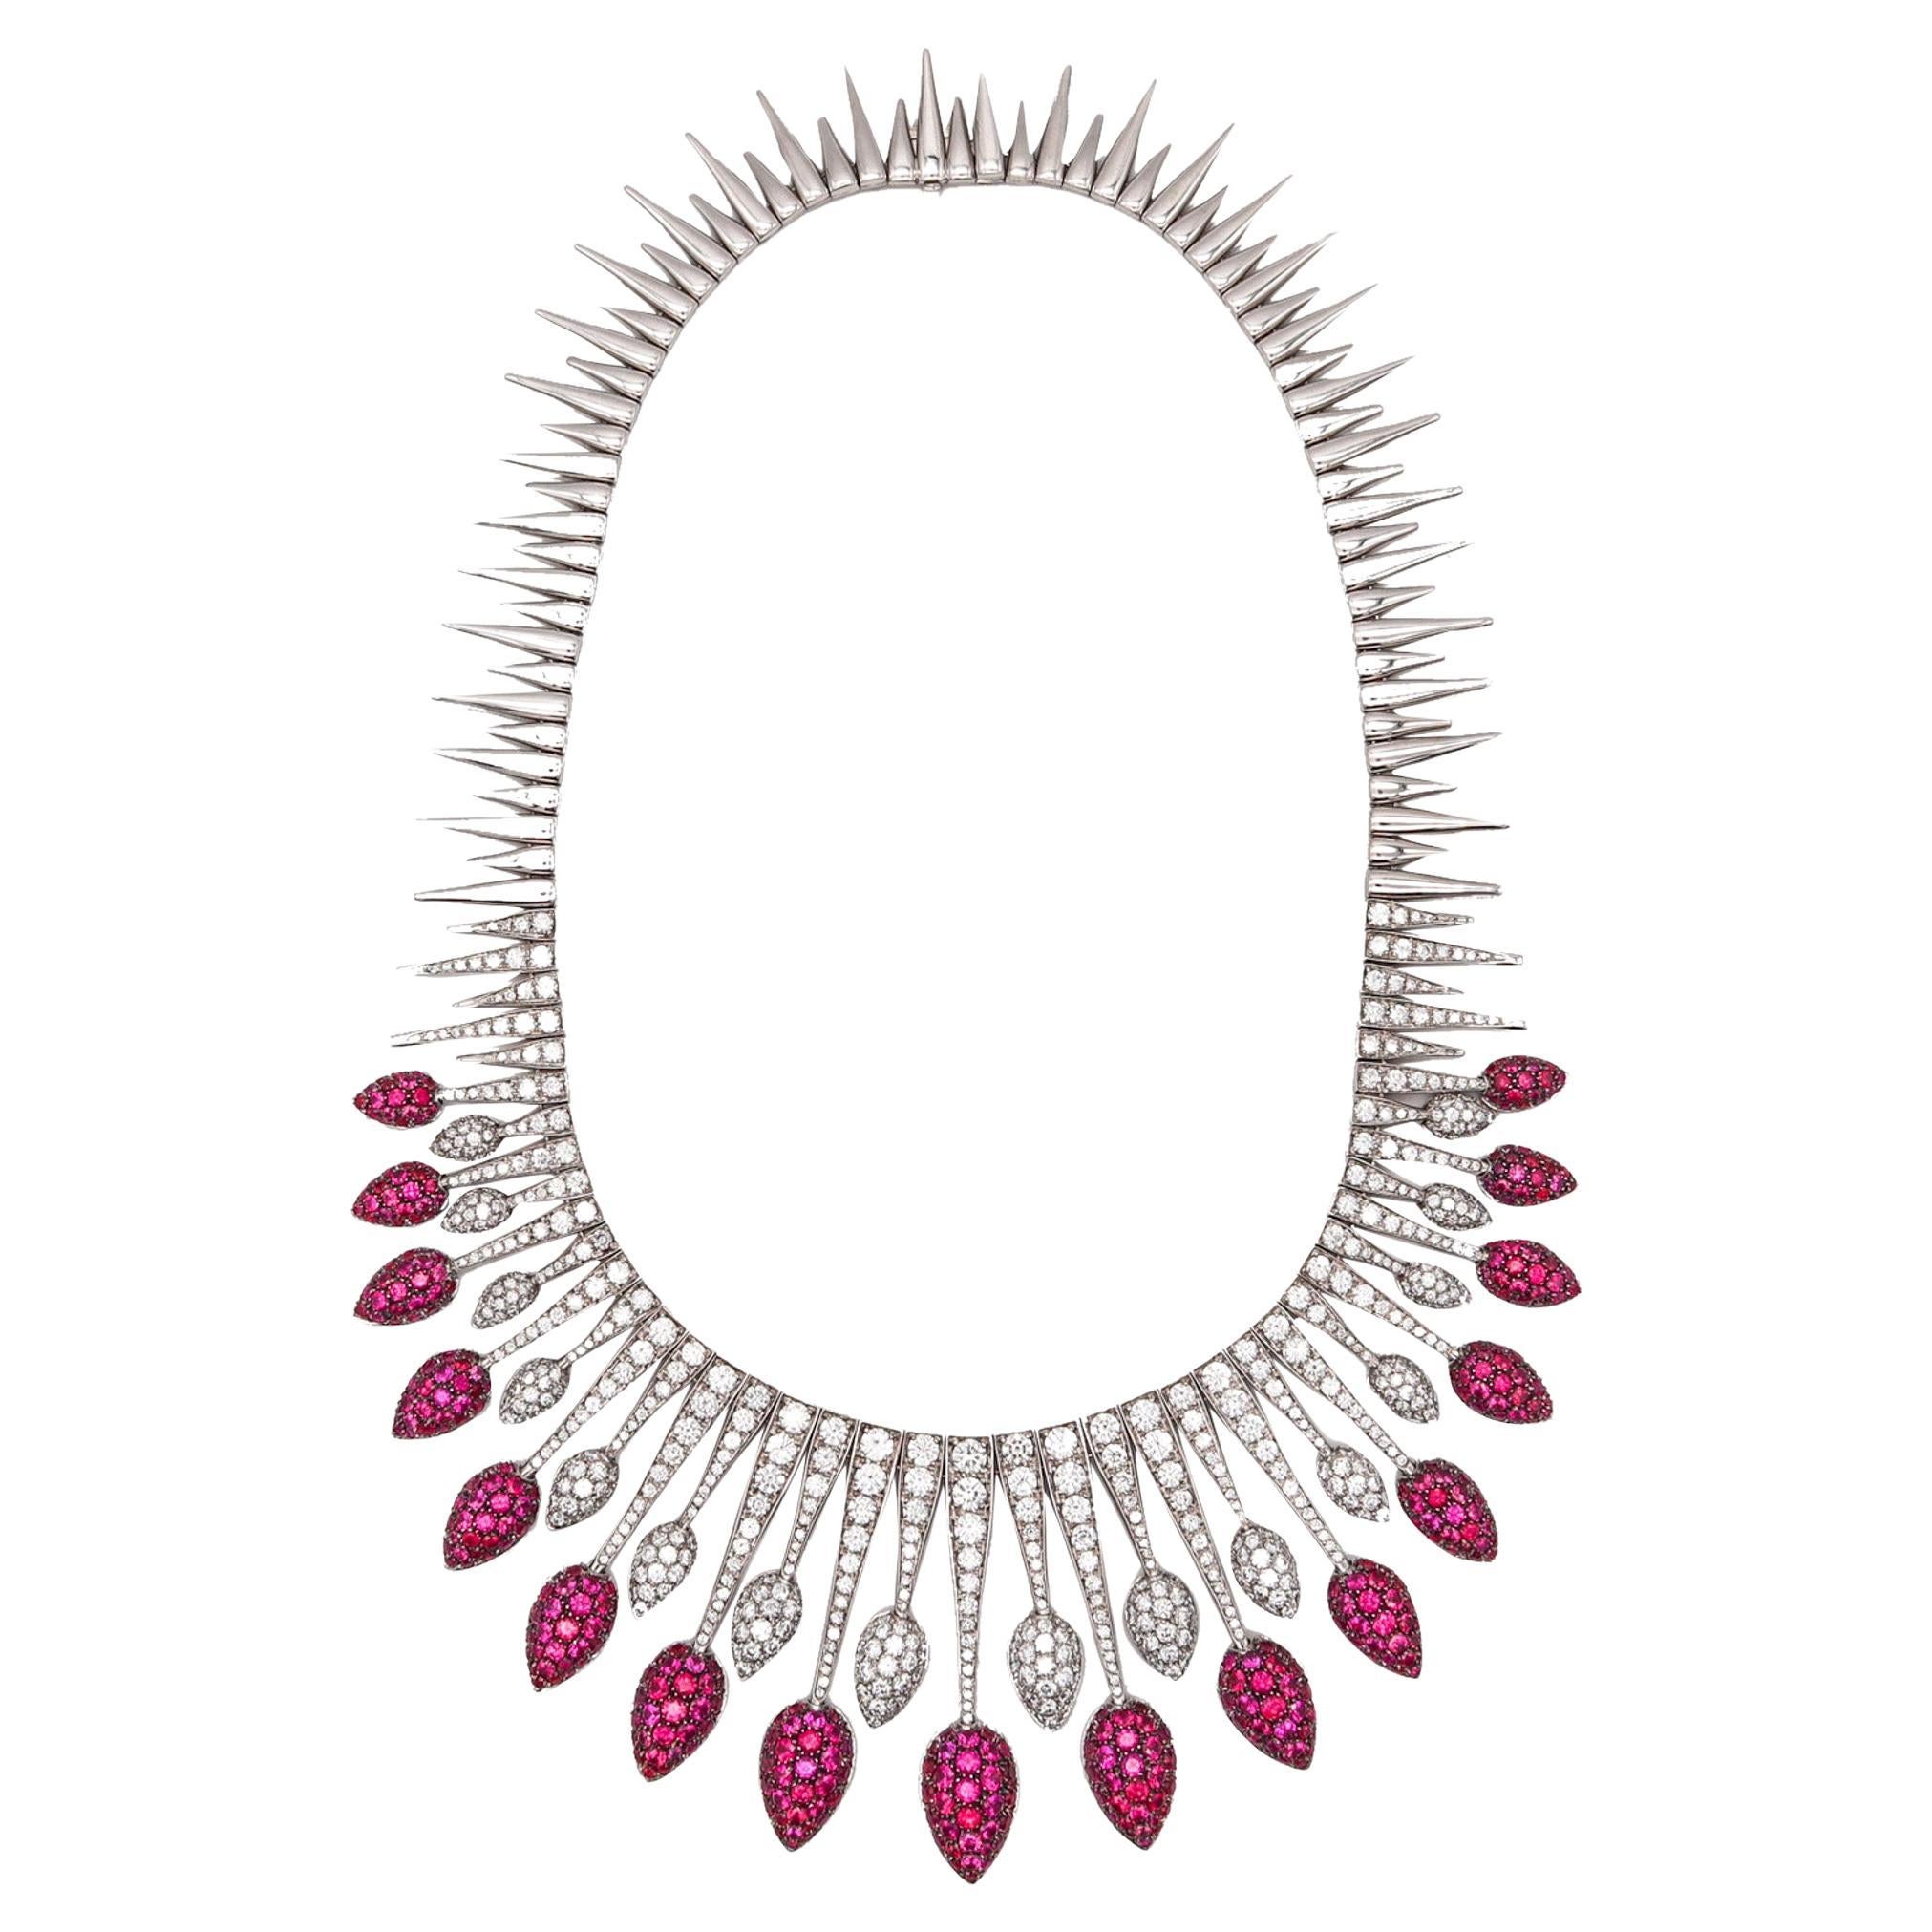 Picchiotti Festoon Necklace In 18Kt Gold With 40.21 Ctw In Diamonds And Rubies For Sale